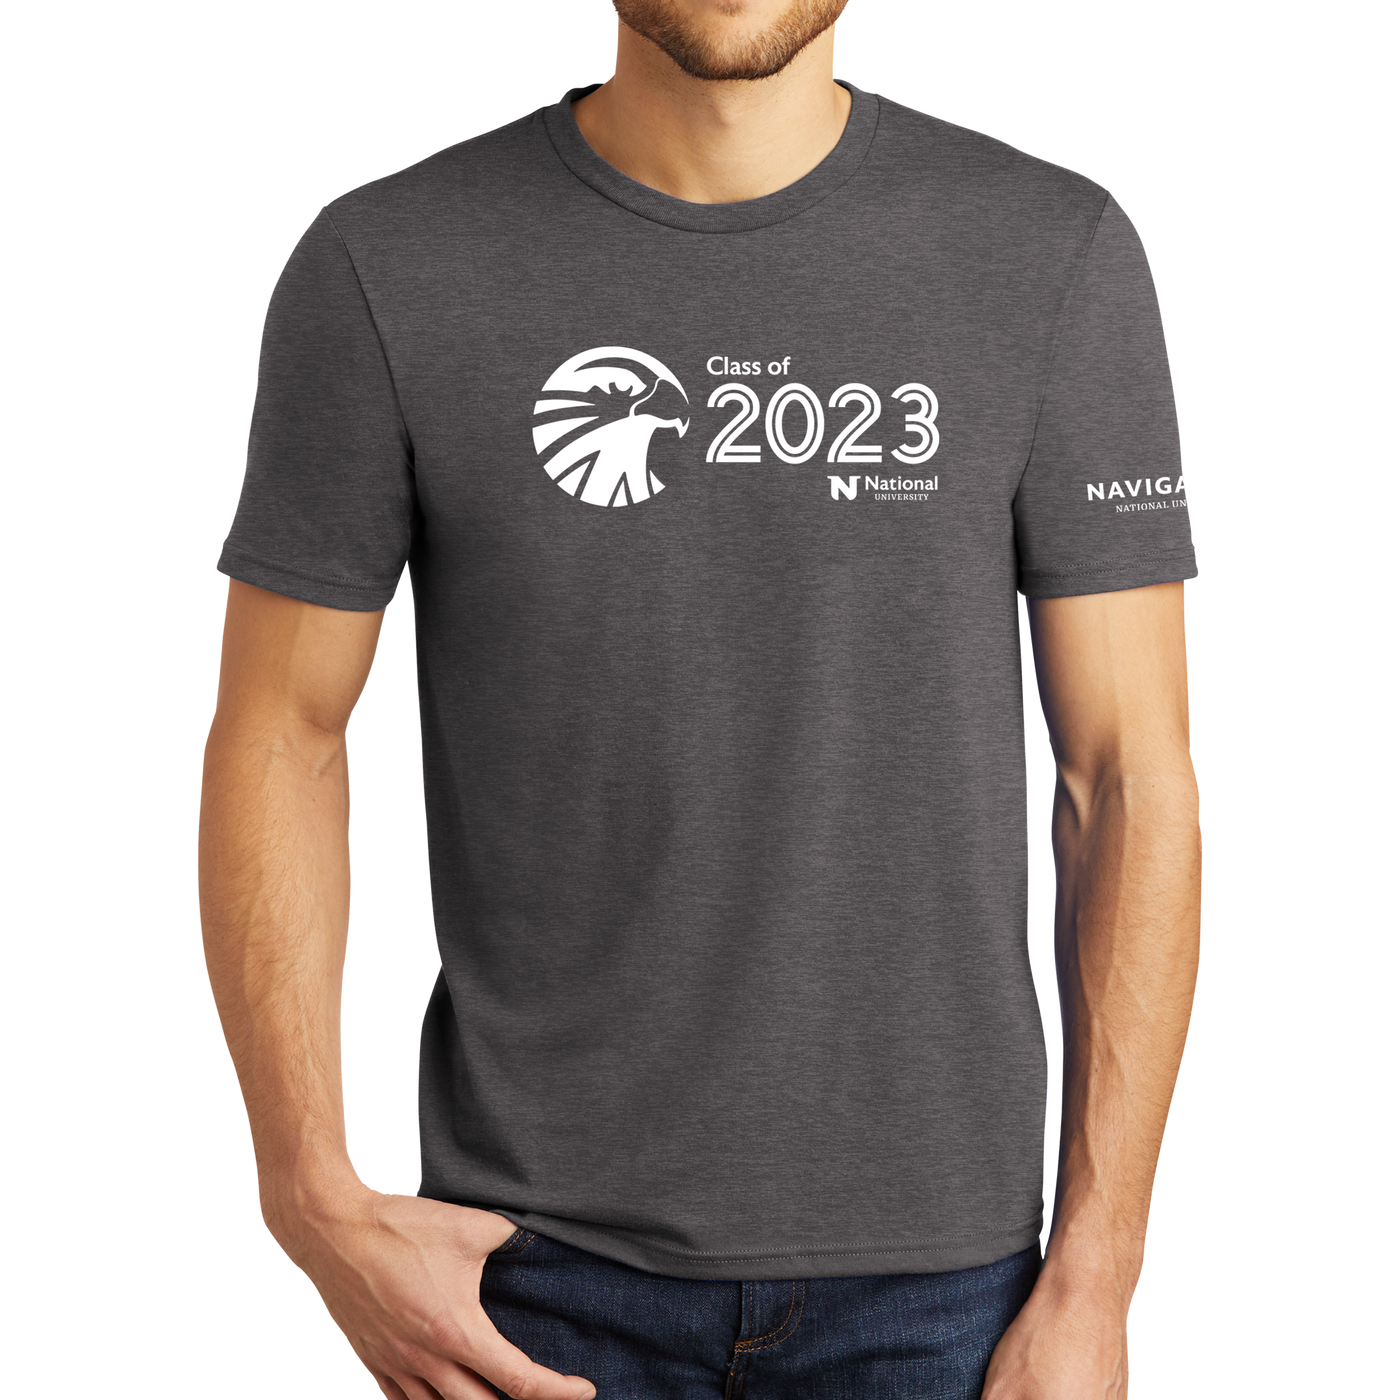 District® - Young Mens Tri-Blend Crew Neck Tee - Falcon 2023